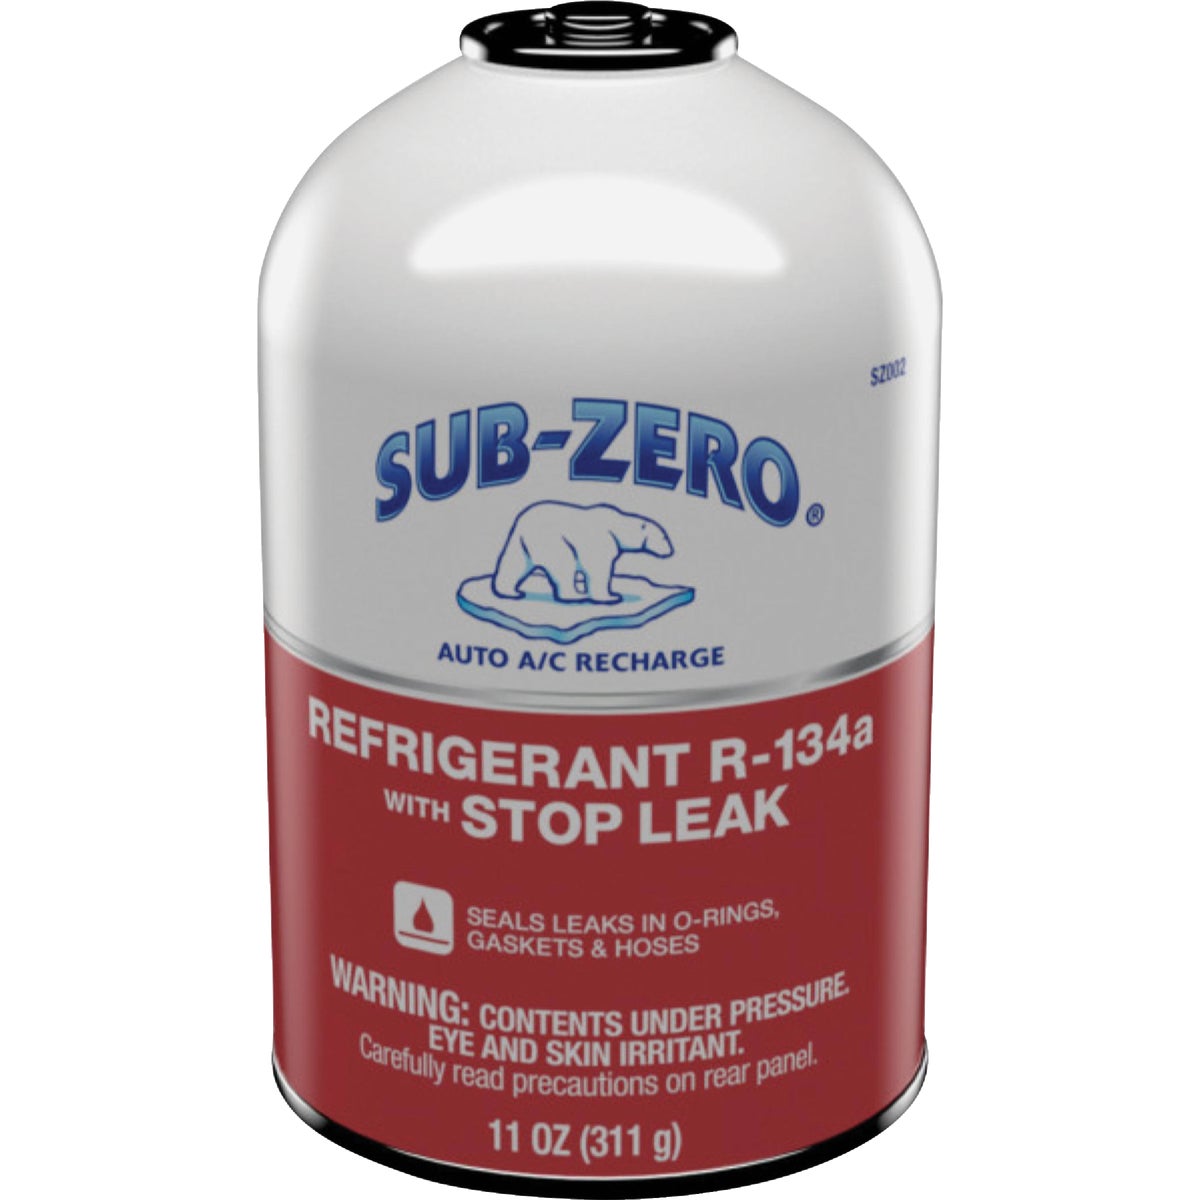 Item 570915, Sub-Zero R-134a with Stop Leak contains approximately 11 Oz.